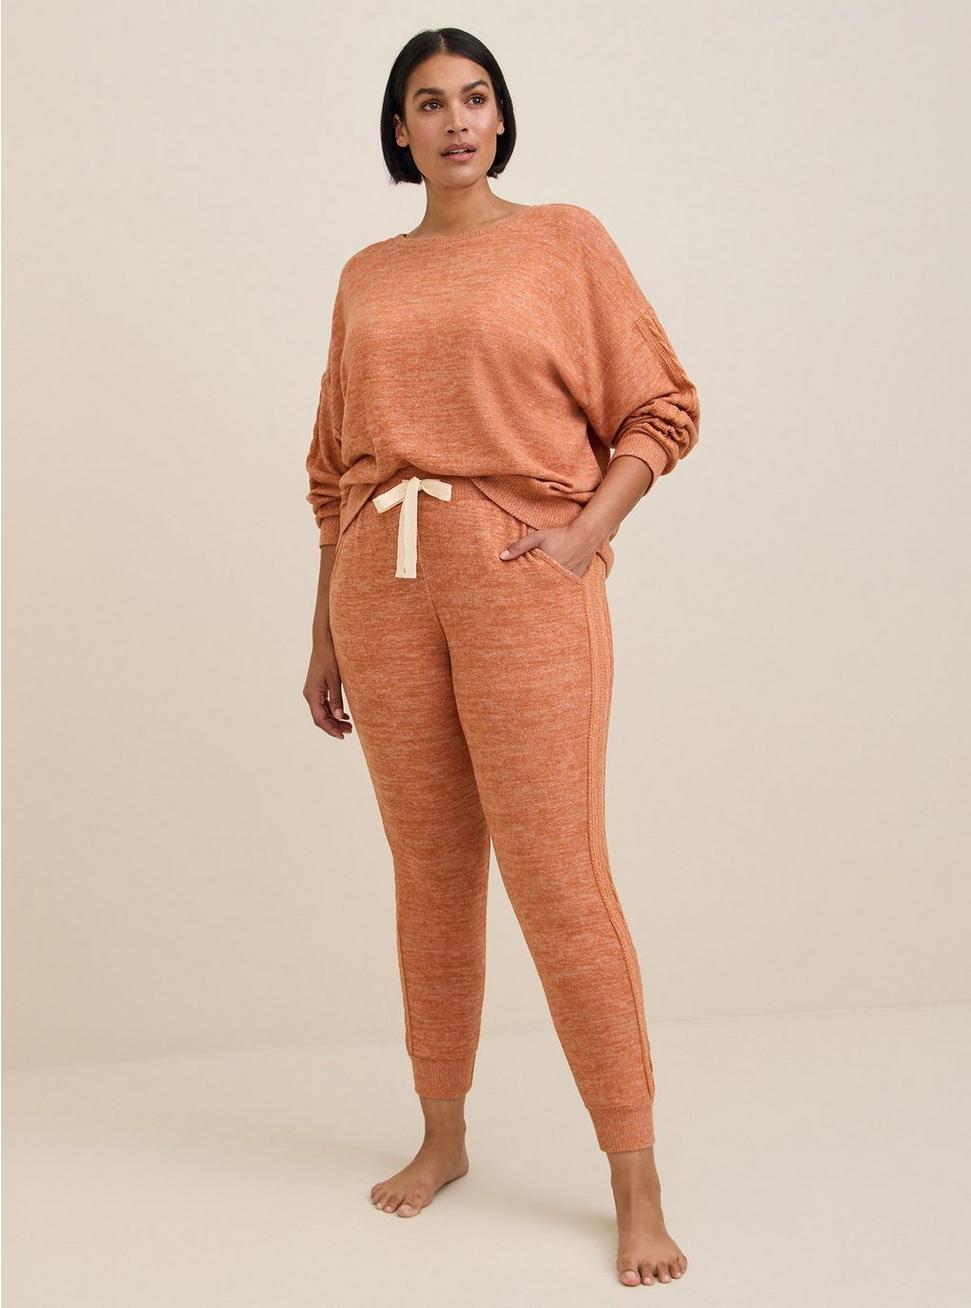 Super Soft Plush Full Length Cable Lounge Jogger, RAW SIENNA, hi-res